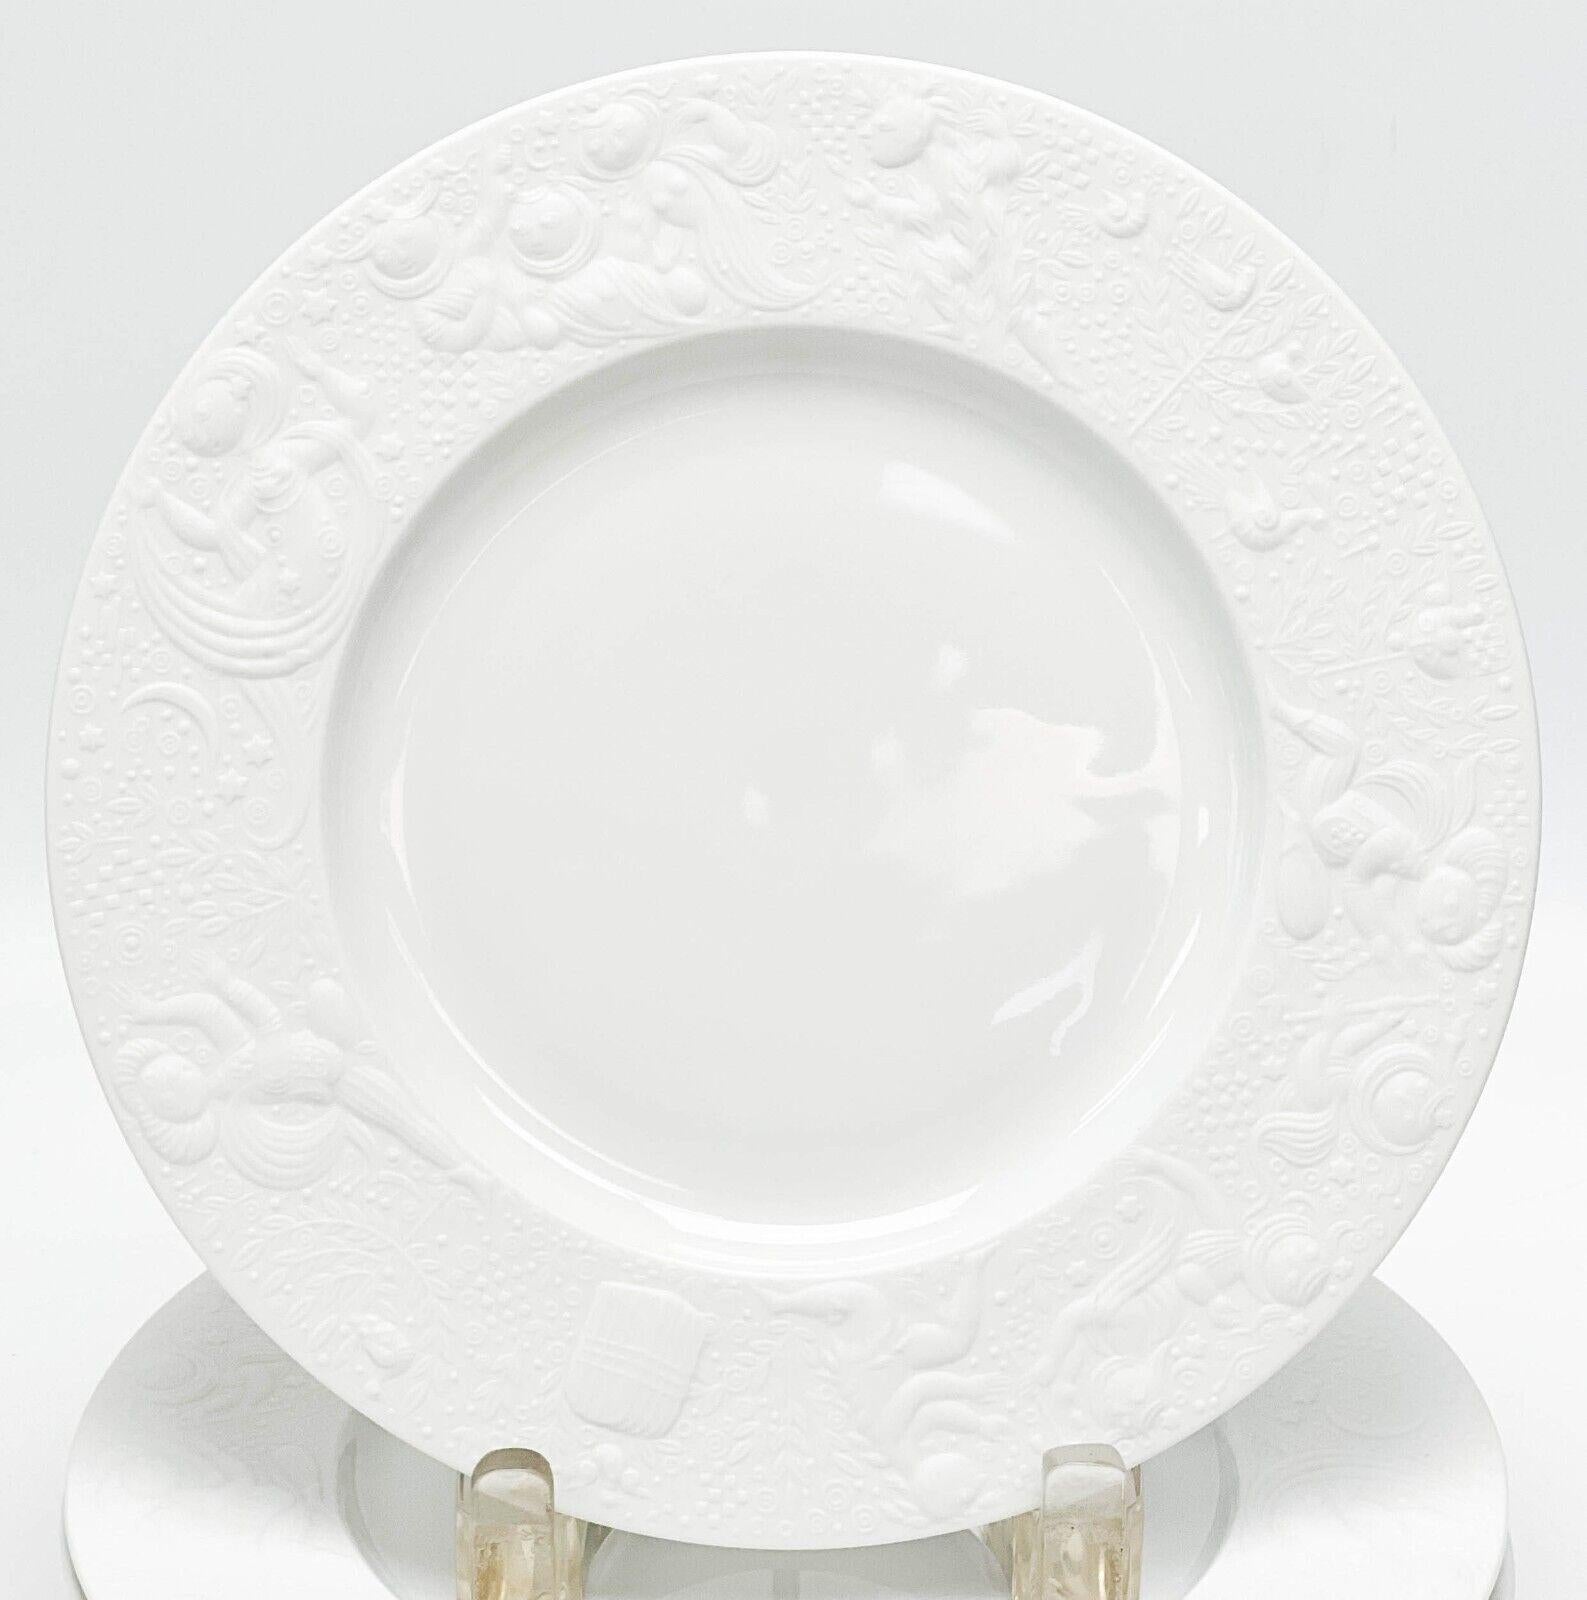 Set of 8 Rosenthal Germany porcelain salad plates in magic flute white.

White porcelain with embossed figures around the rim with a matte finish. Underside marked Rosenthal Germany, Bijorn Wiinblad and with various gold lettering to the underside